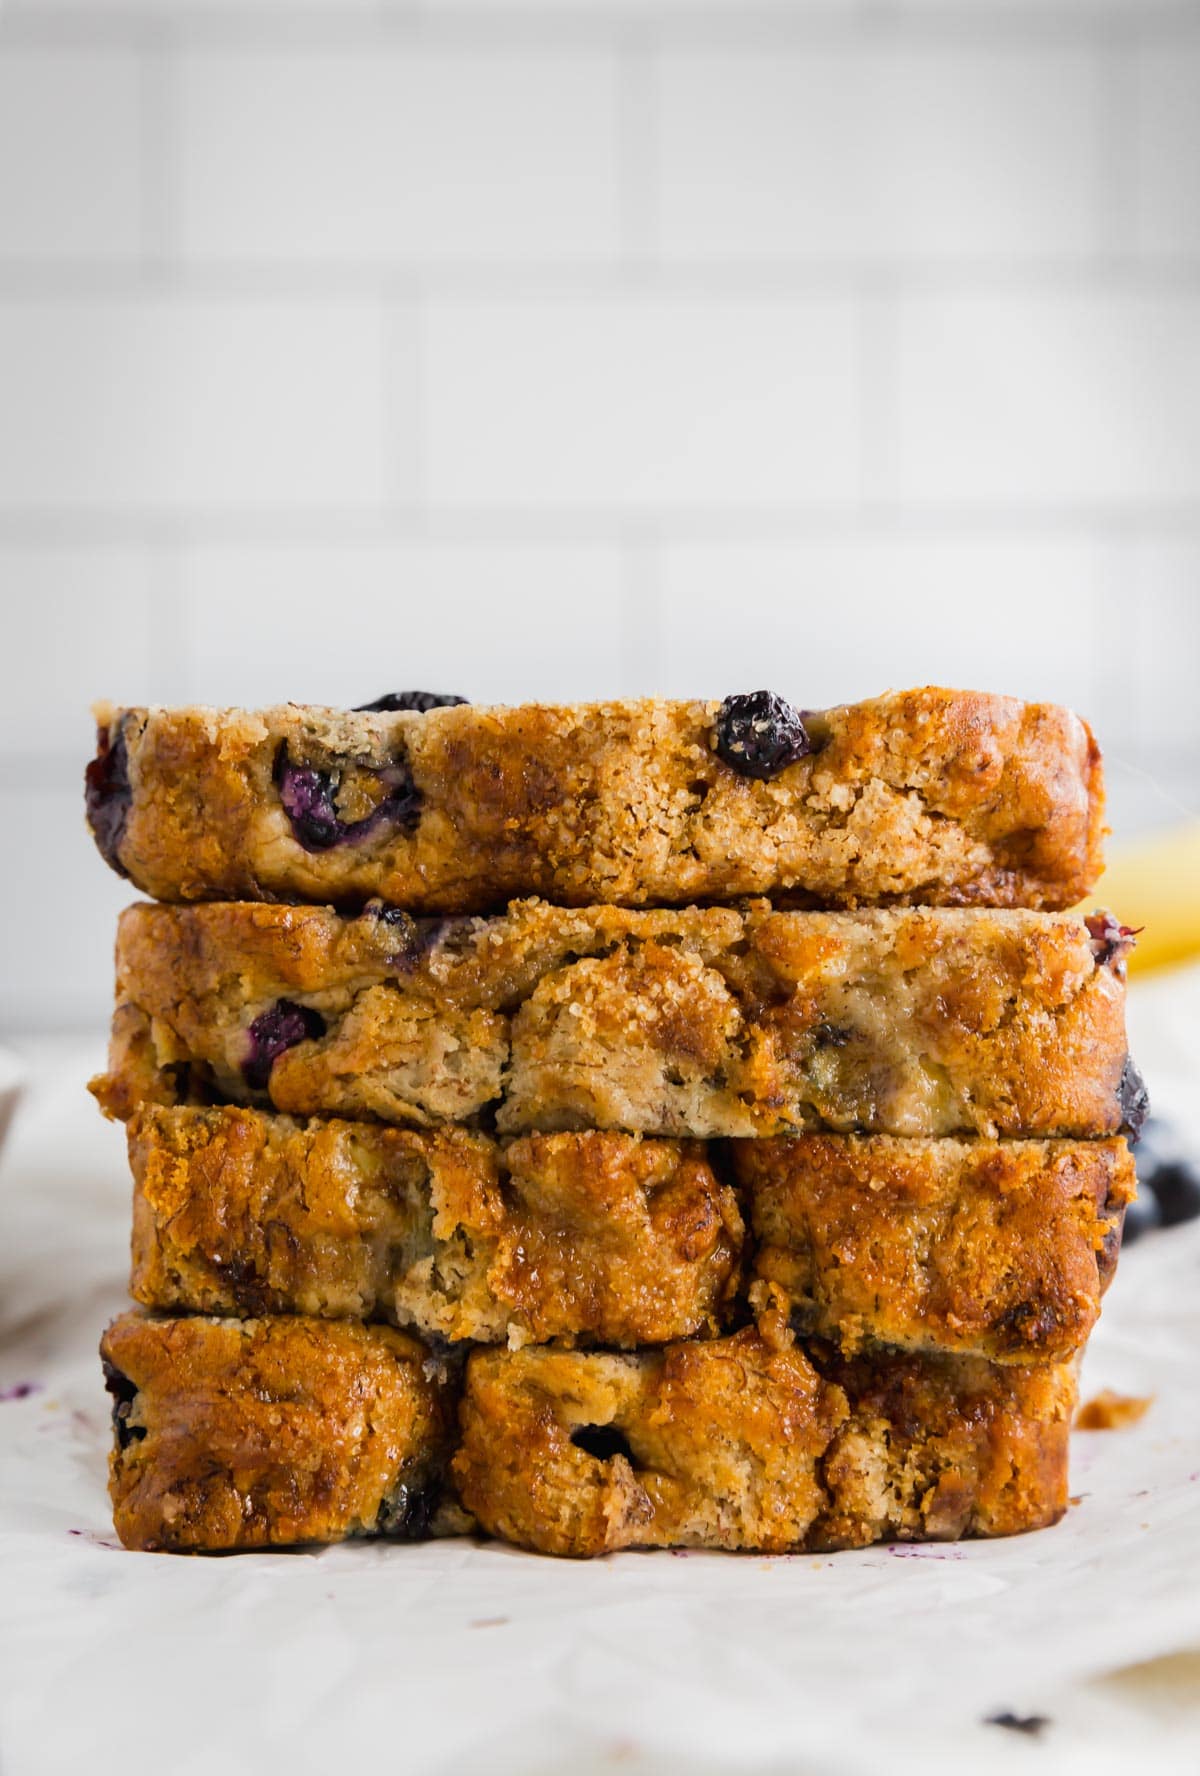 A photo of four slices of gluten-free blueberry banana bread stacked on top of each other.